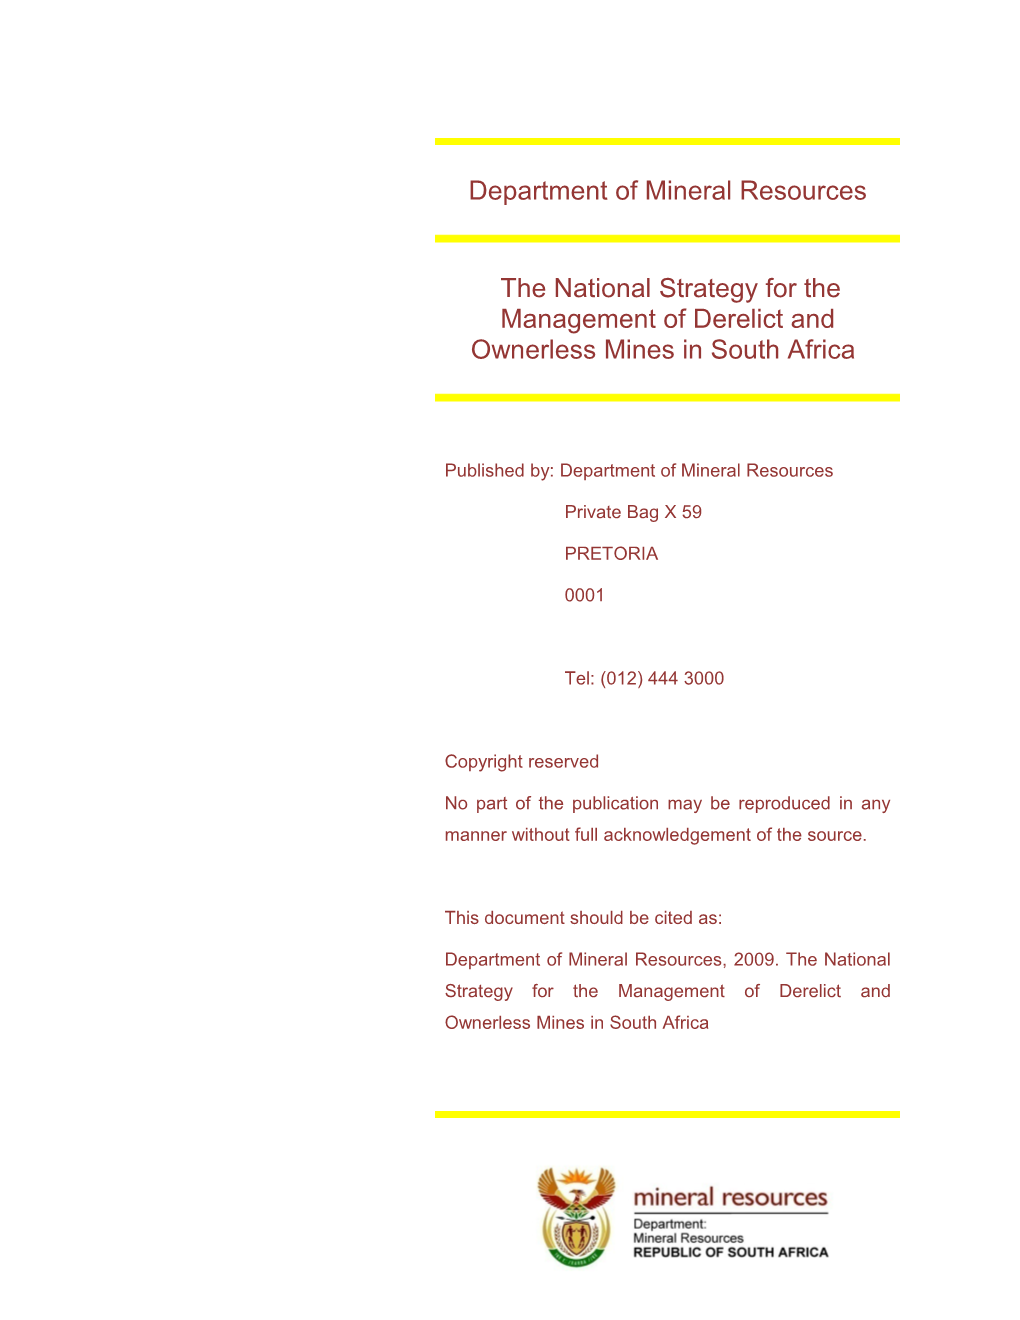 Department of Minerals and Energy, 2009, the National Strategy for the Management of Derelict